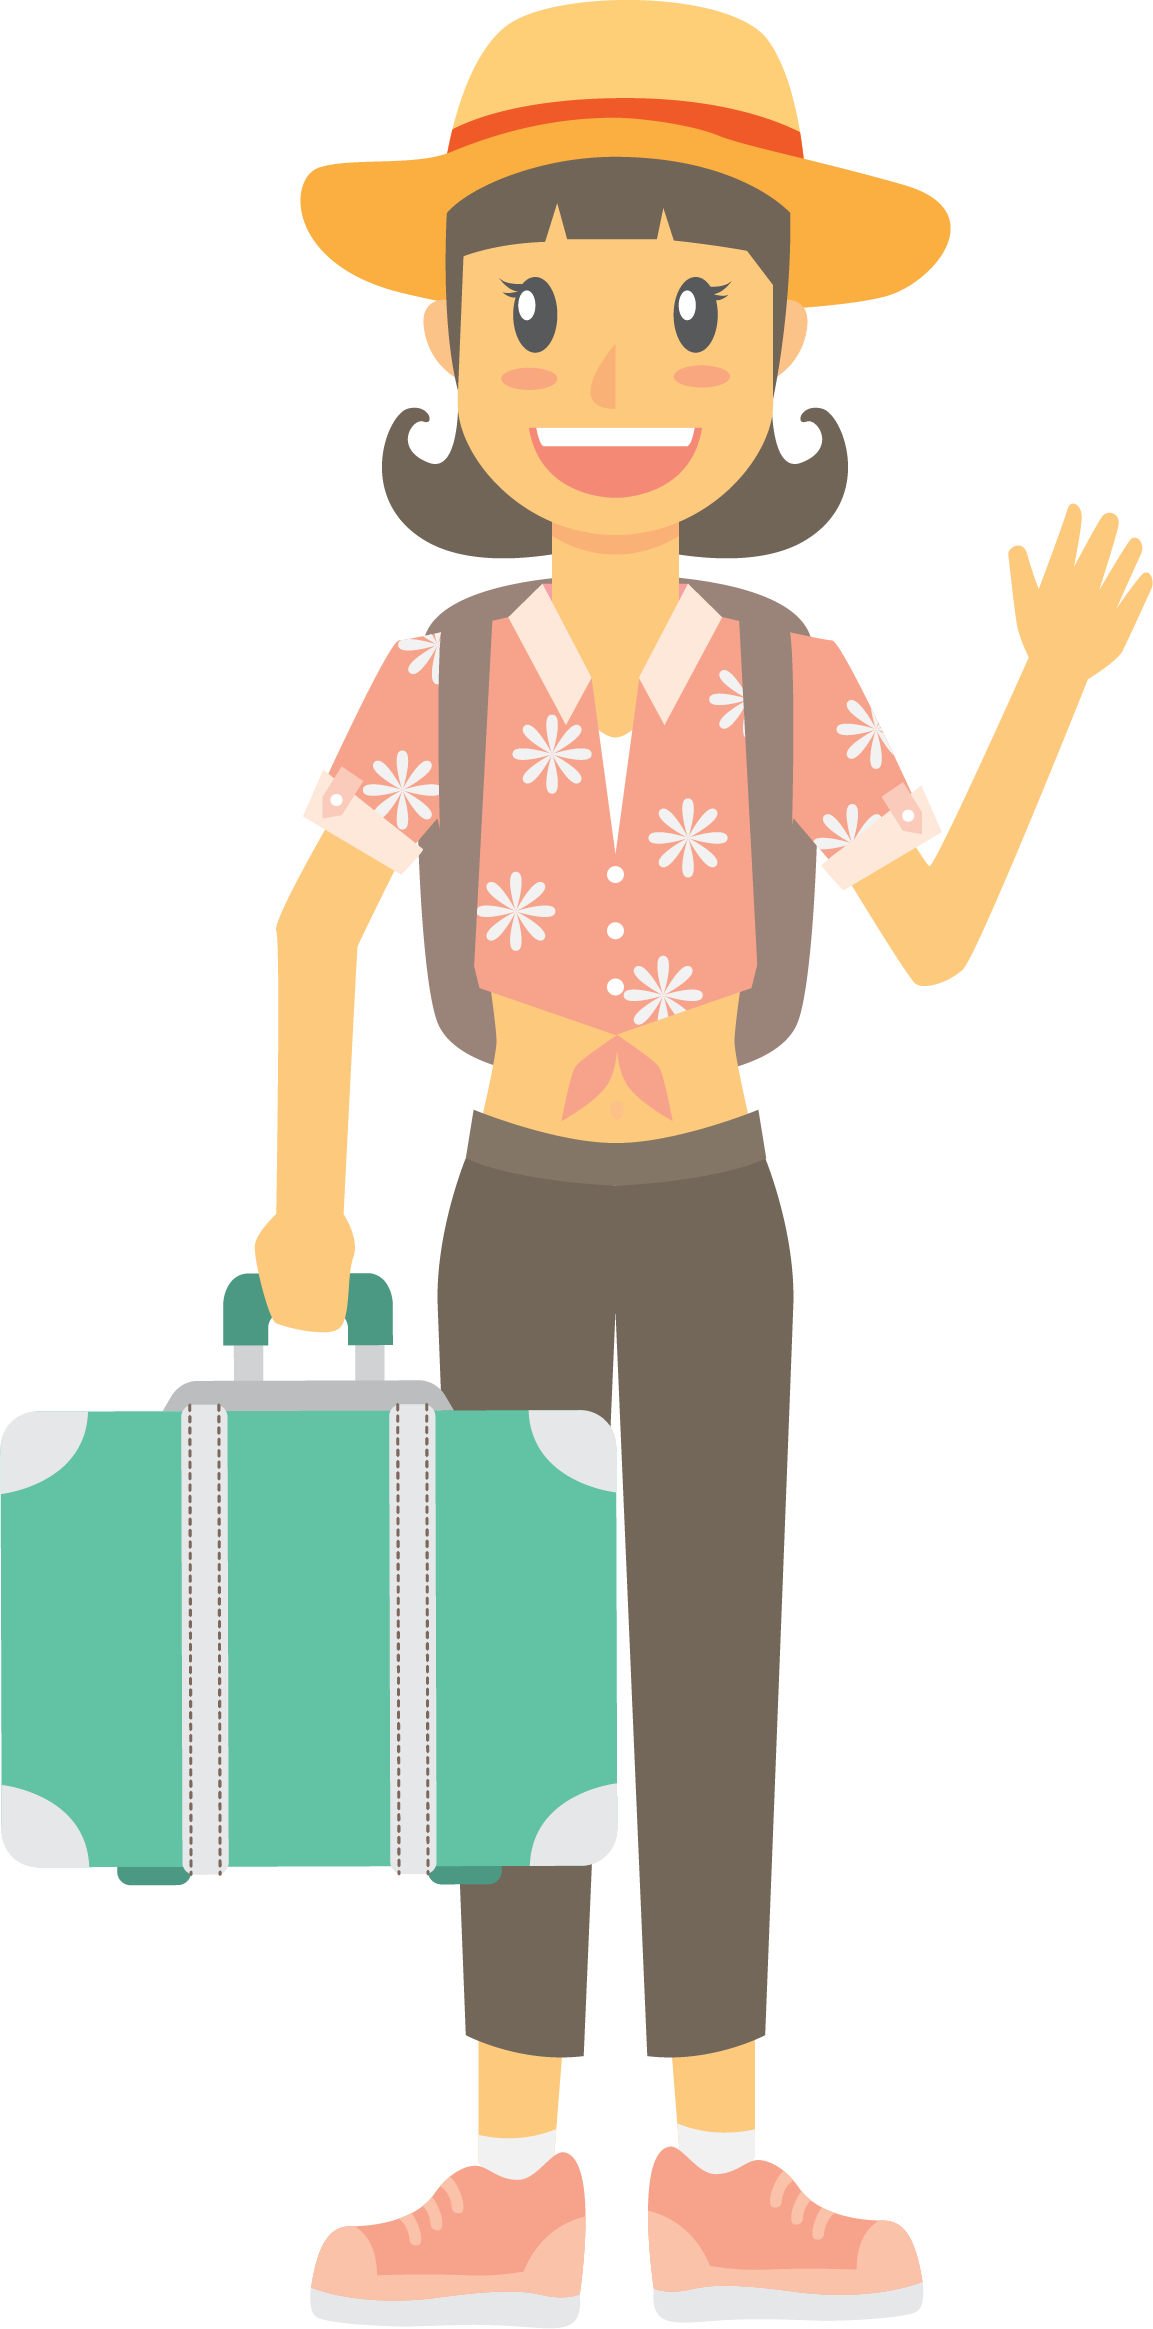 On Summer Seaside Holidays Infographic In Tourism Clipart